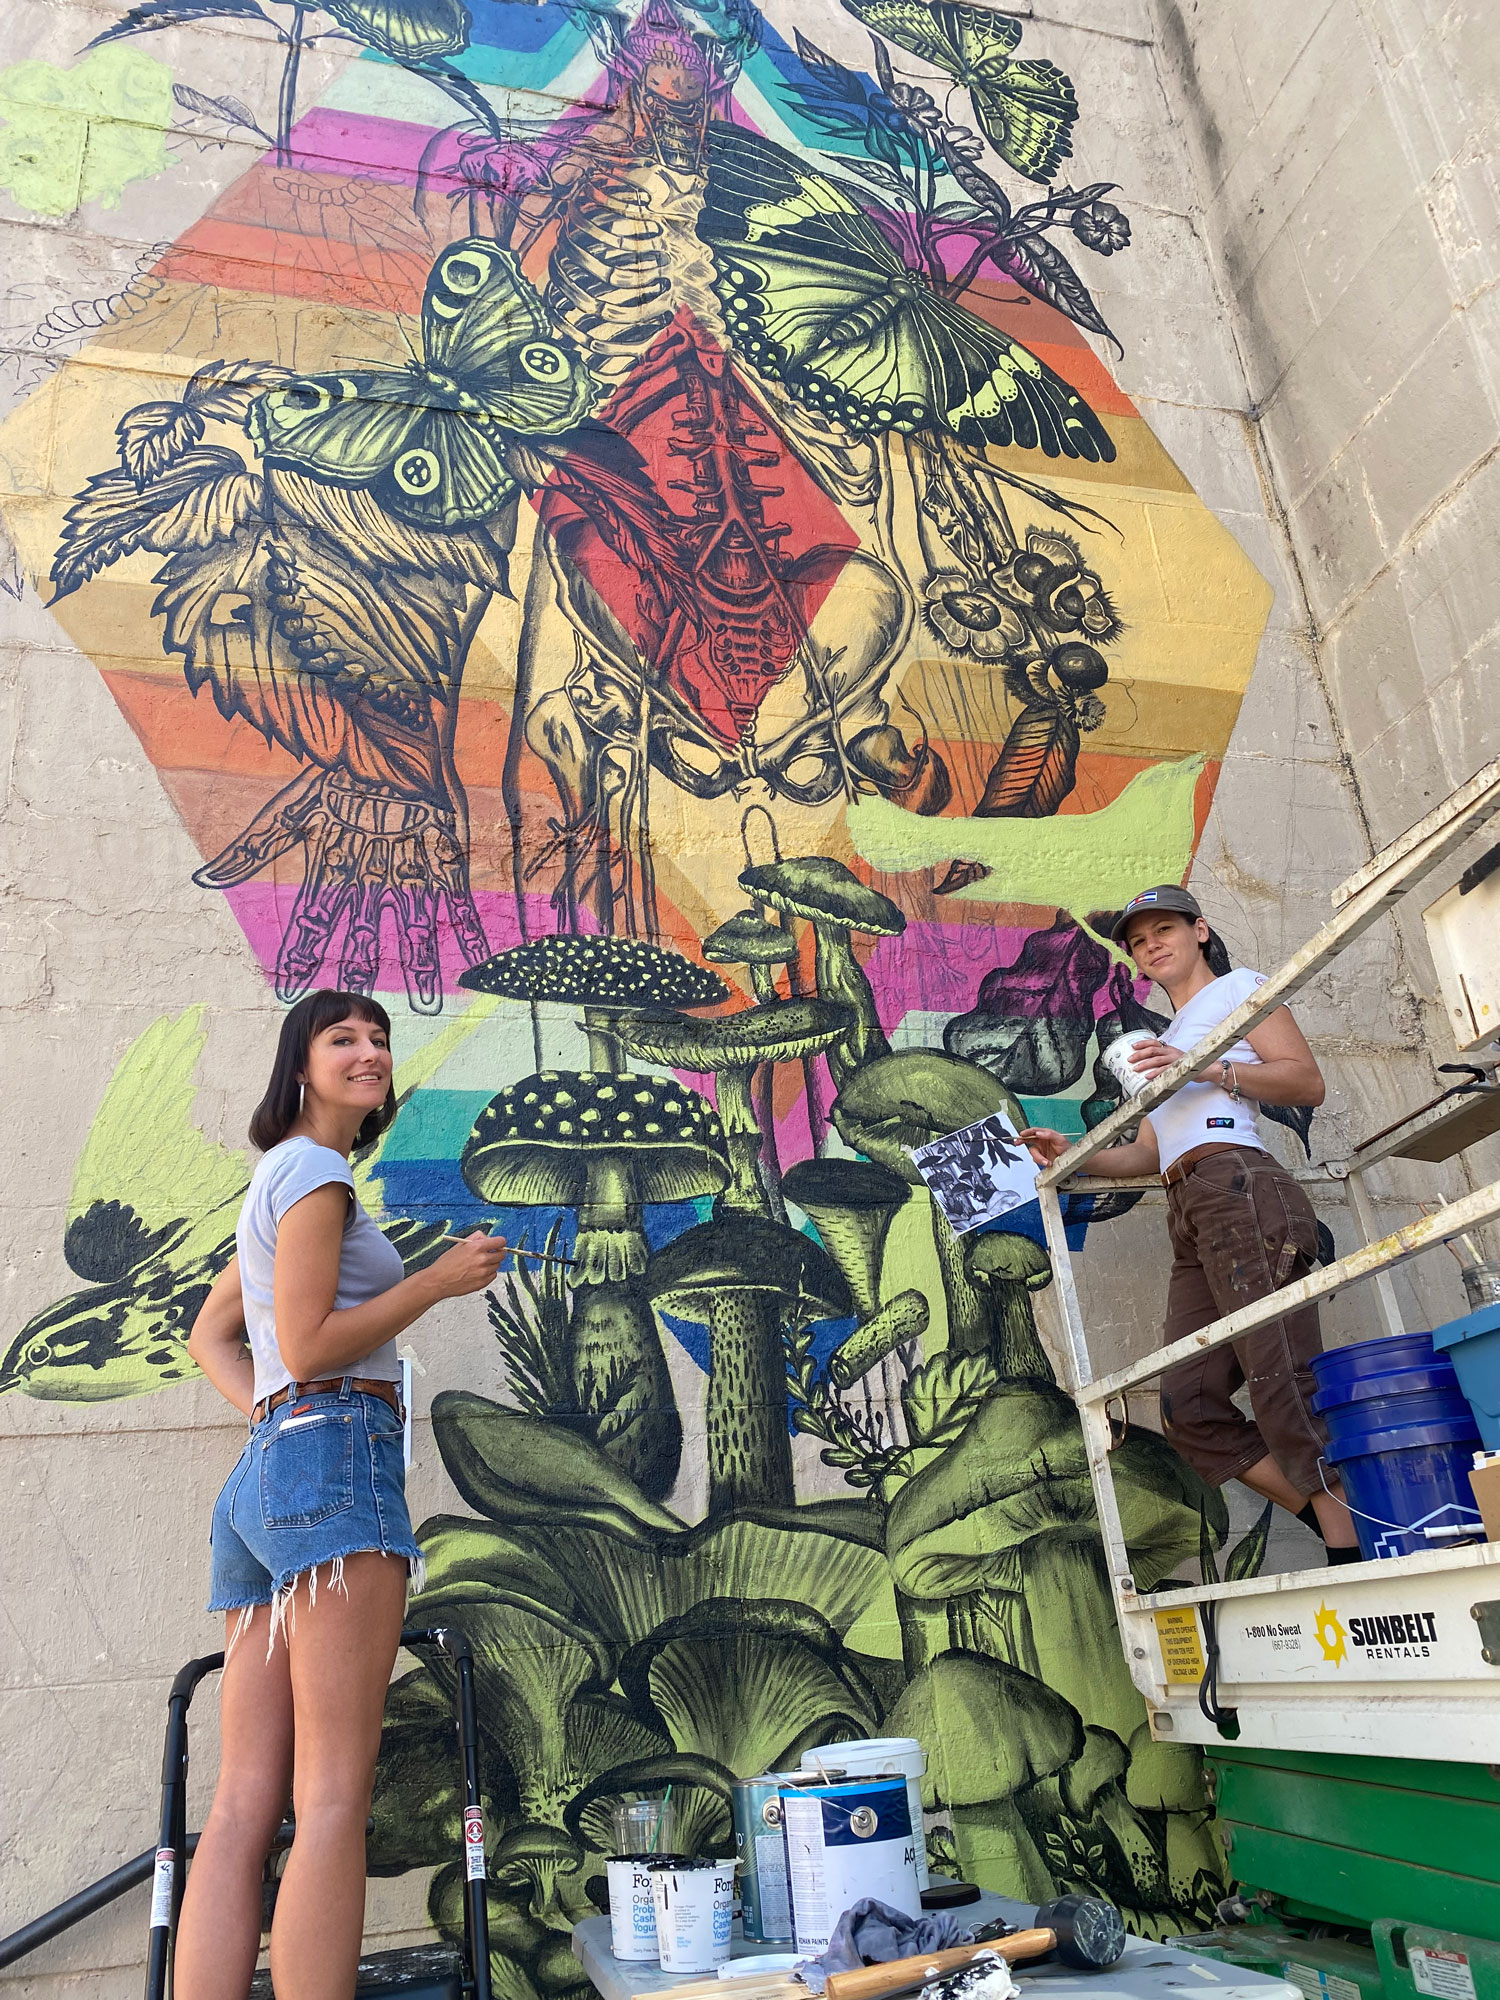 Two women stand in front of a colorful mural that they are painting. The mural contains bright colors of red, orange, pink, and yellow while depicting butterflies, moths, a human skeleton, and leaves.